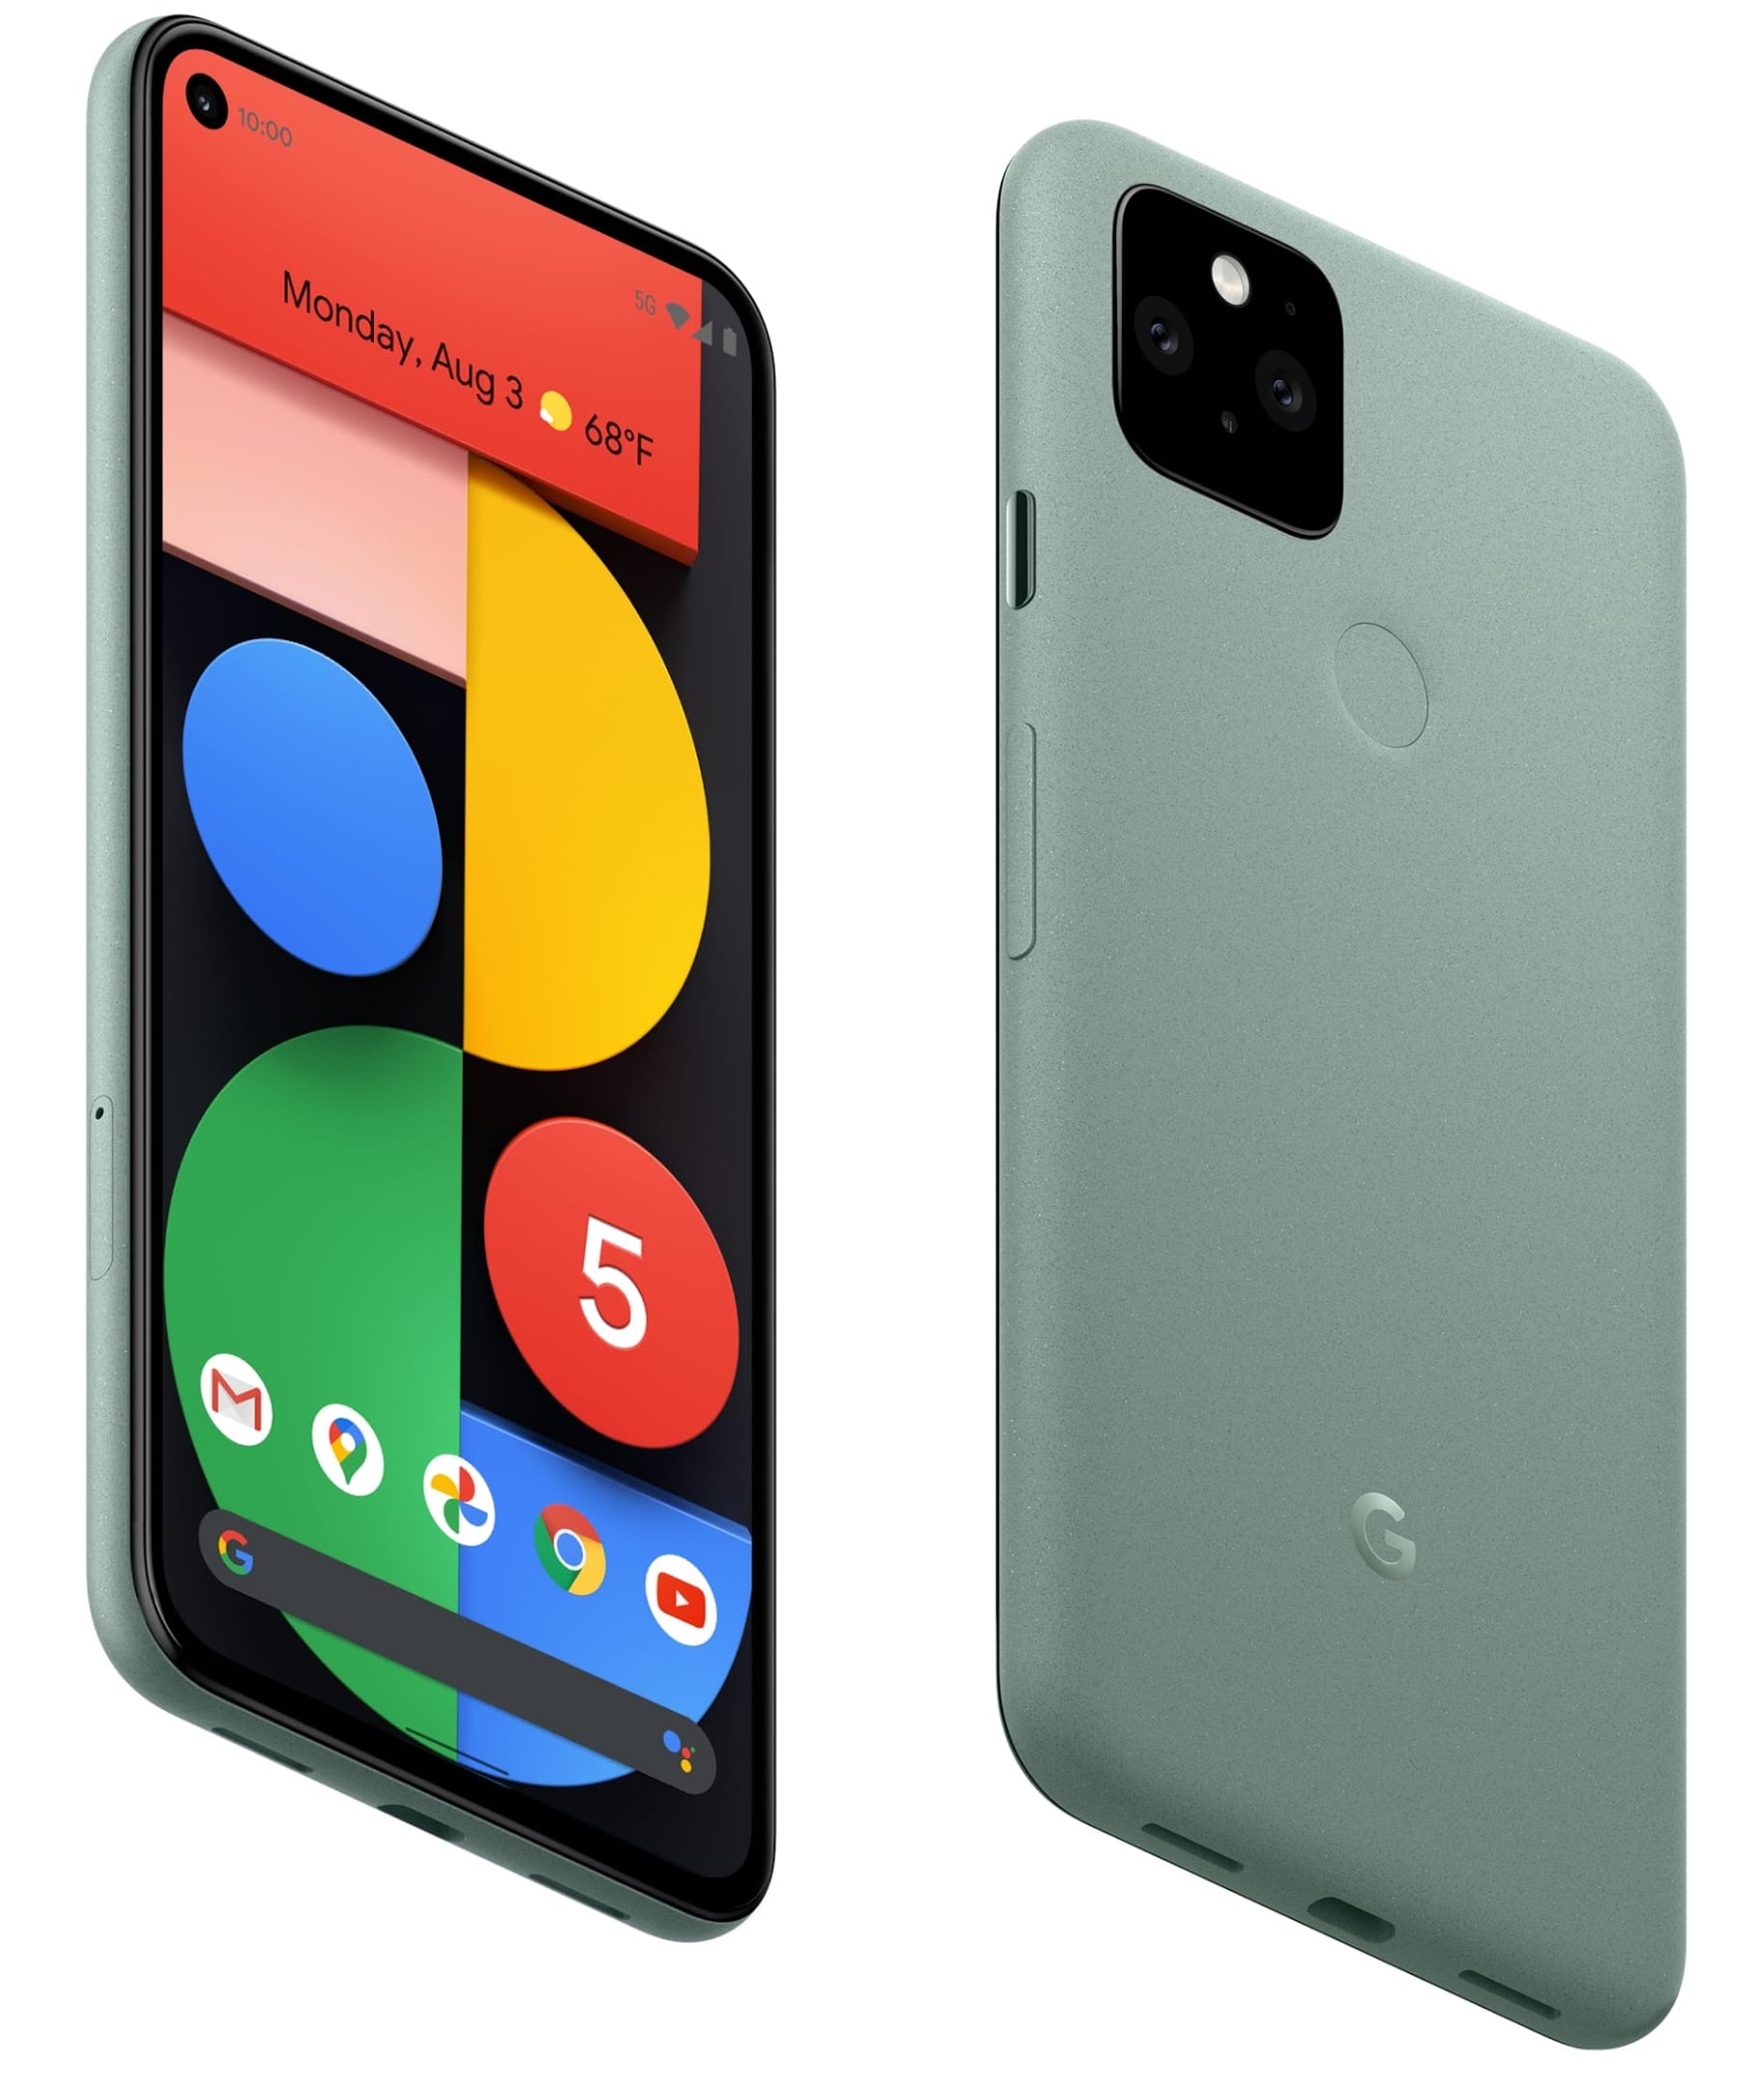 Google Unveils New Flagship Pixel 5 Smartphone With 5G and $699 Price